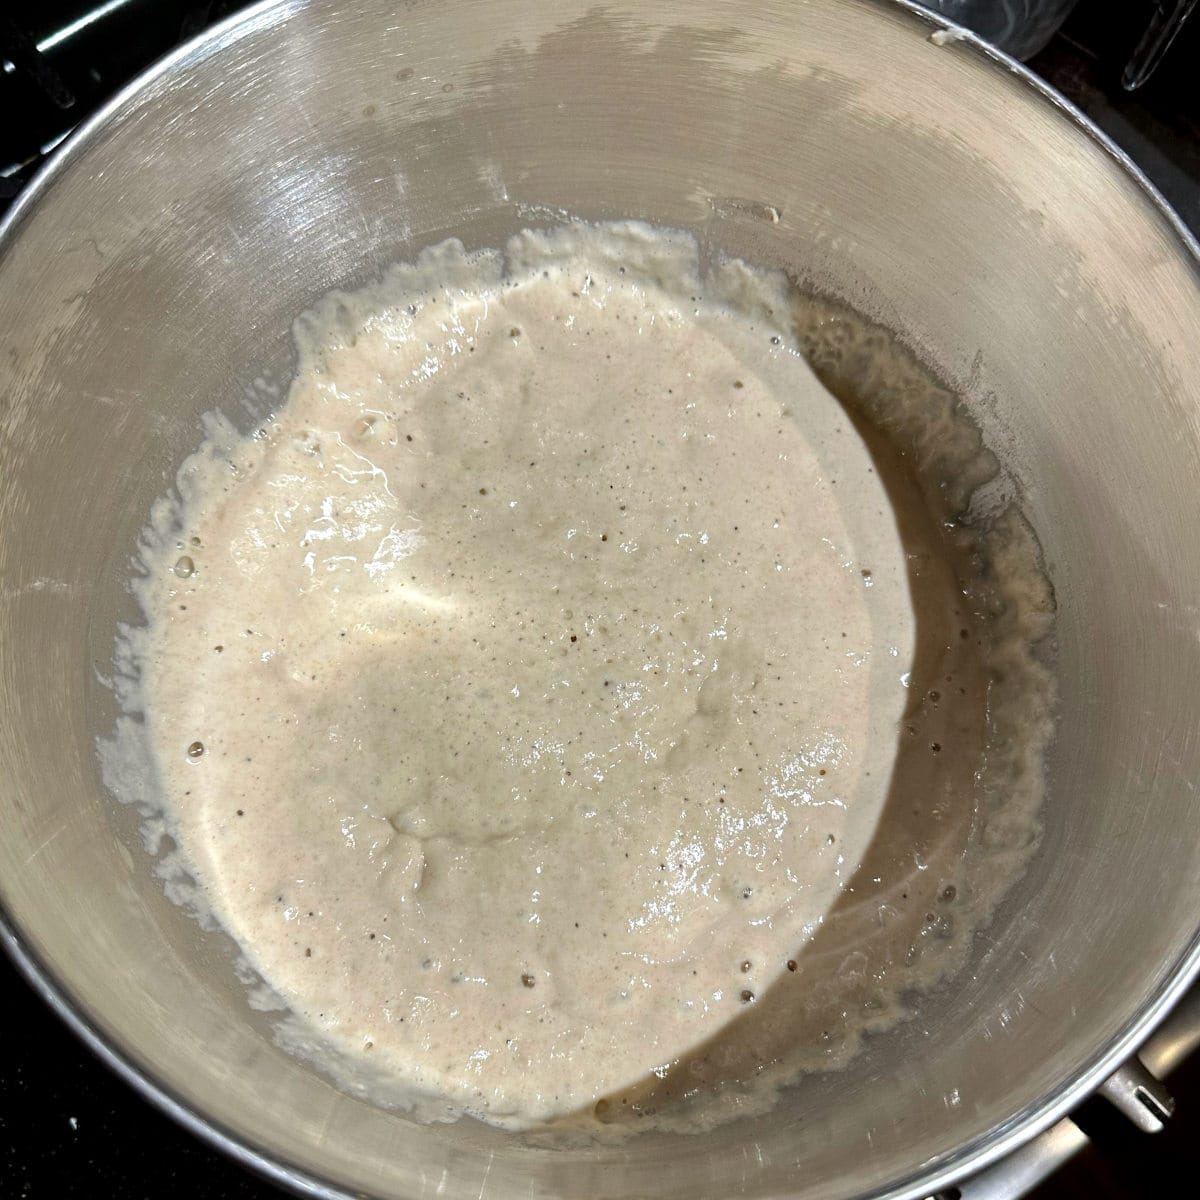 Sourdough starter after standing for four hours.